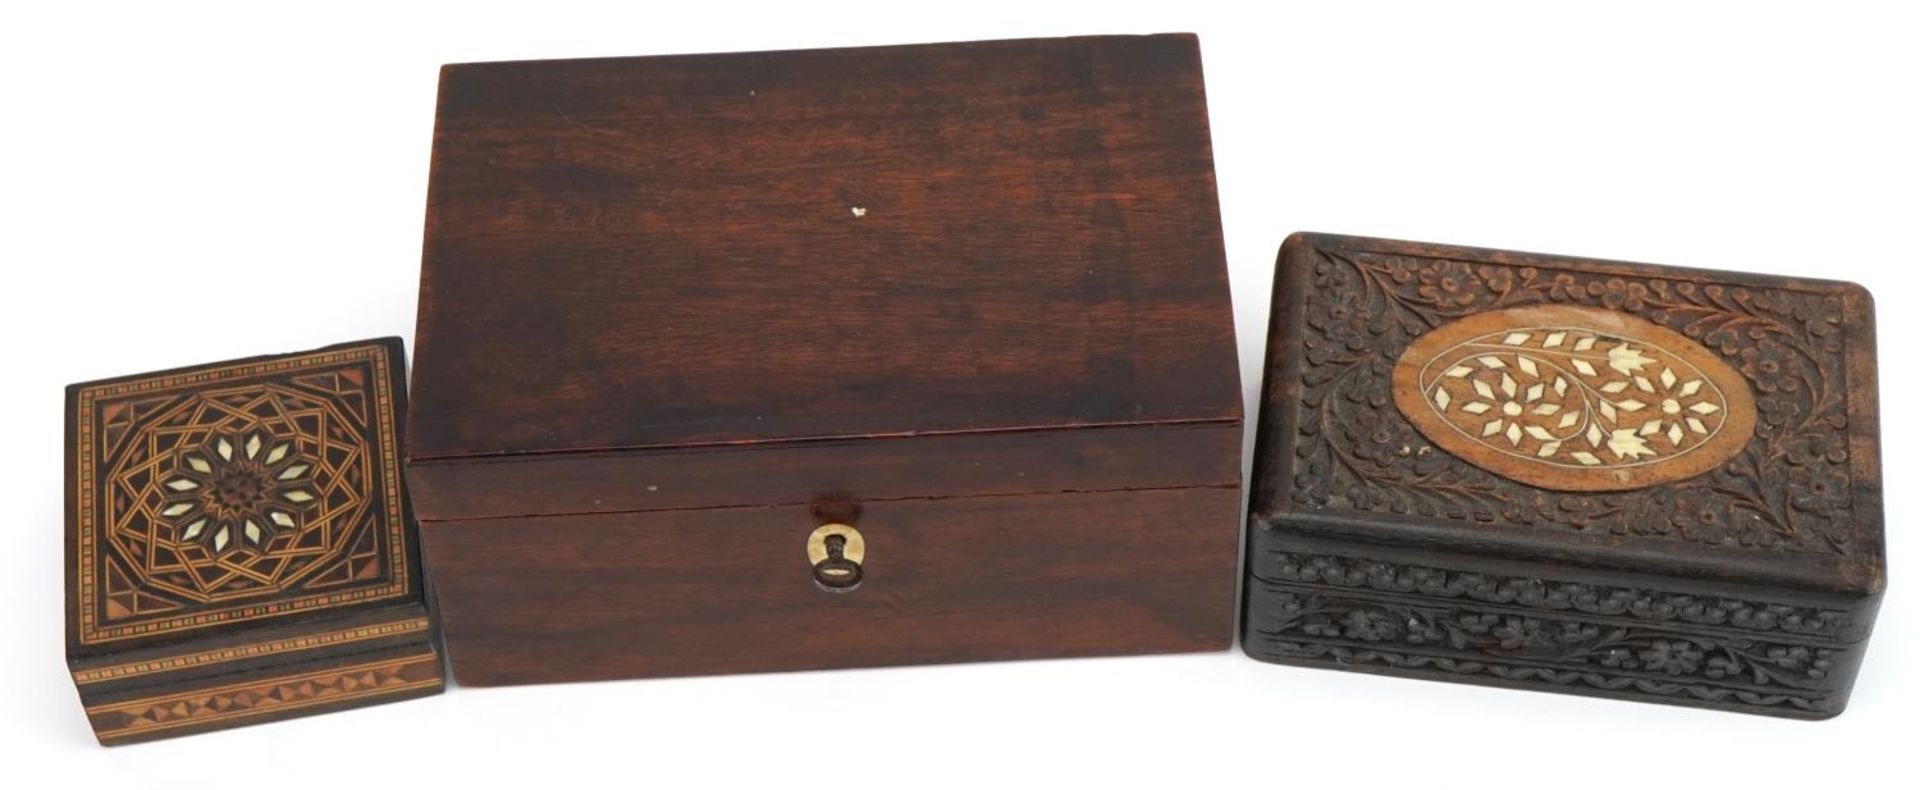 Woodenware including an Anglo Indian box carved with flowers and a Moorish style inlaid box, the - Bild 2 aus 4